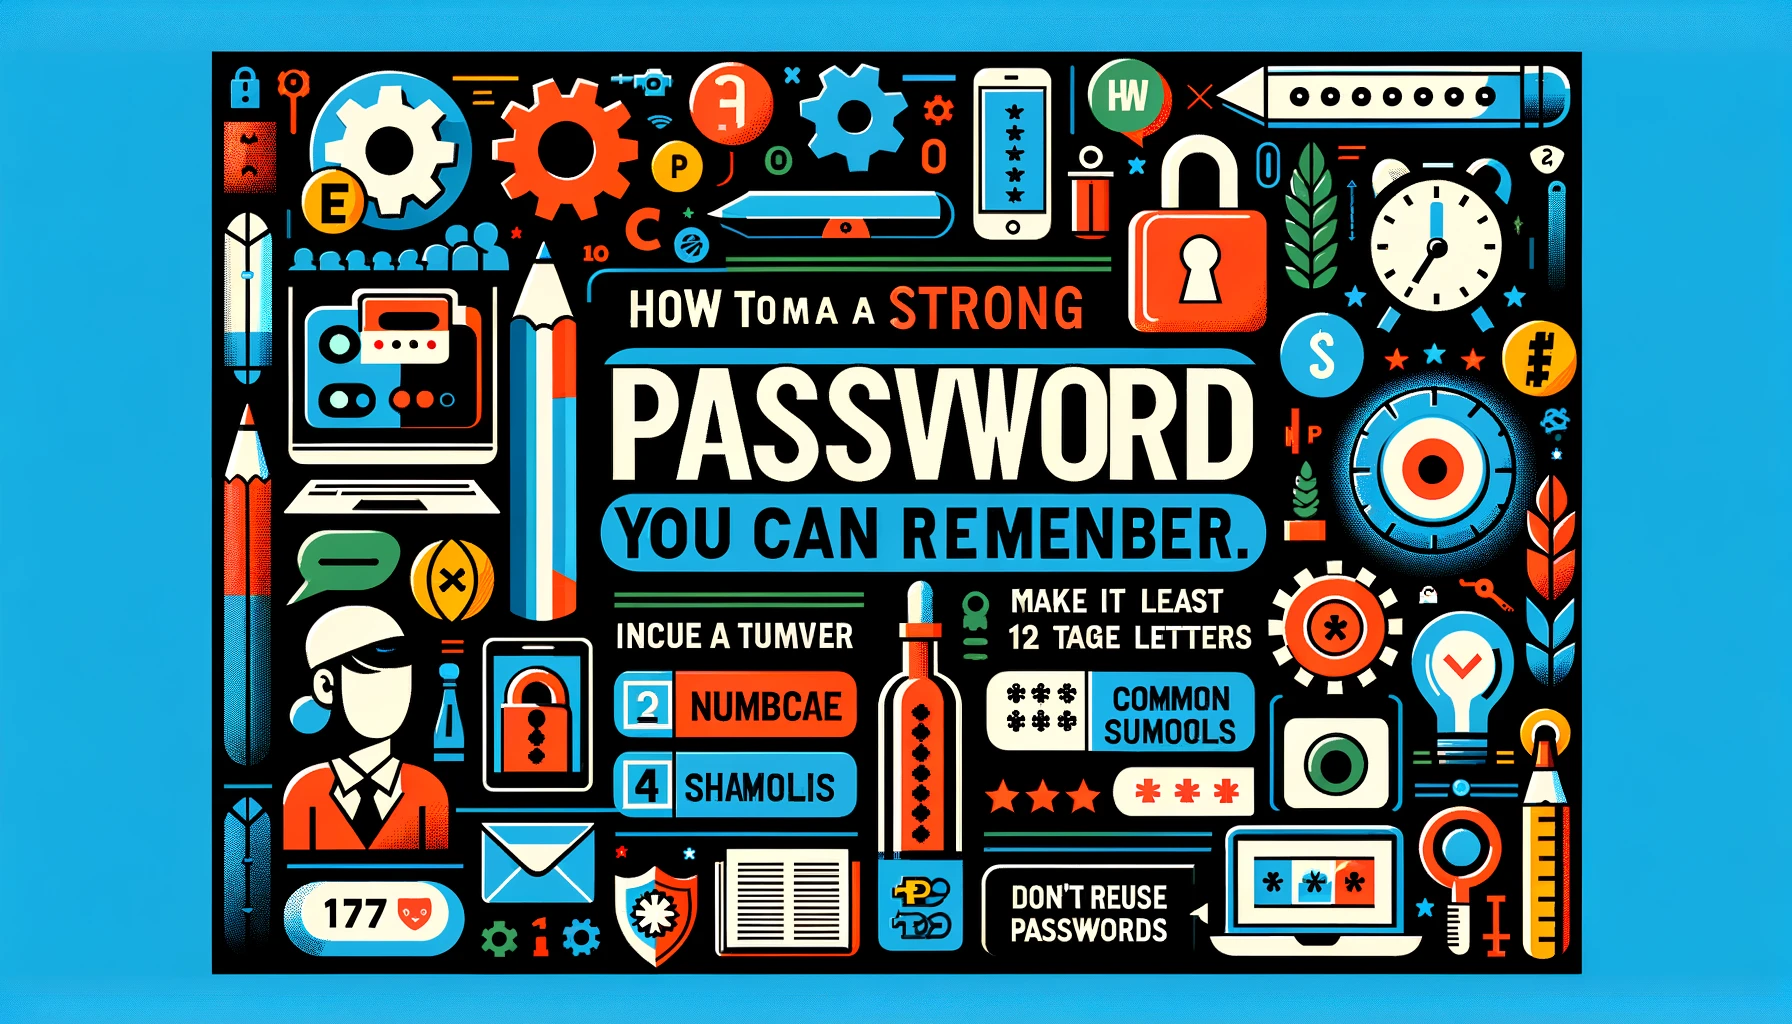 How To Make A Strong Password You Can Remember